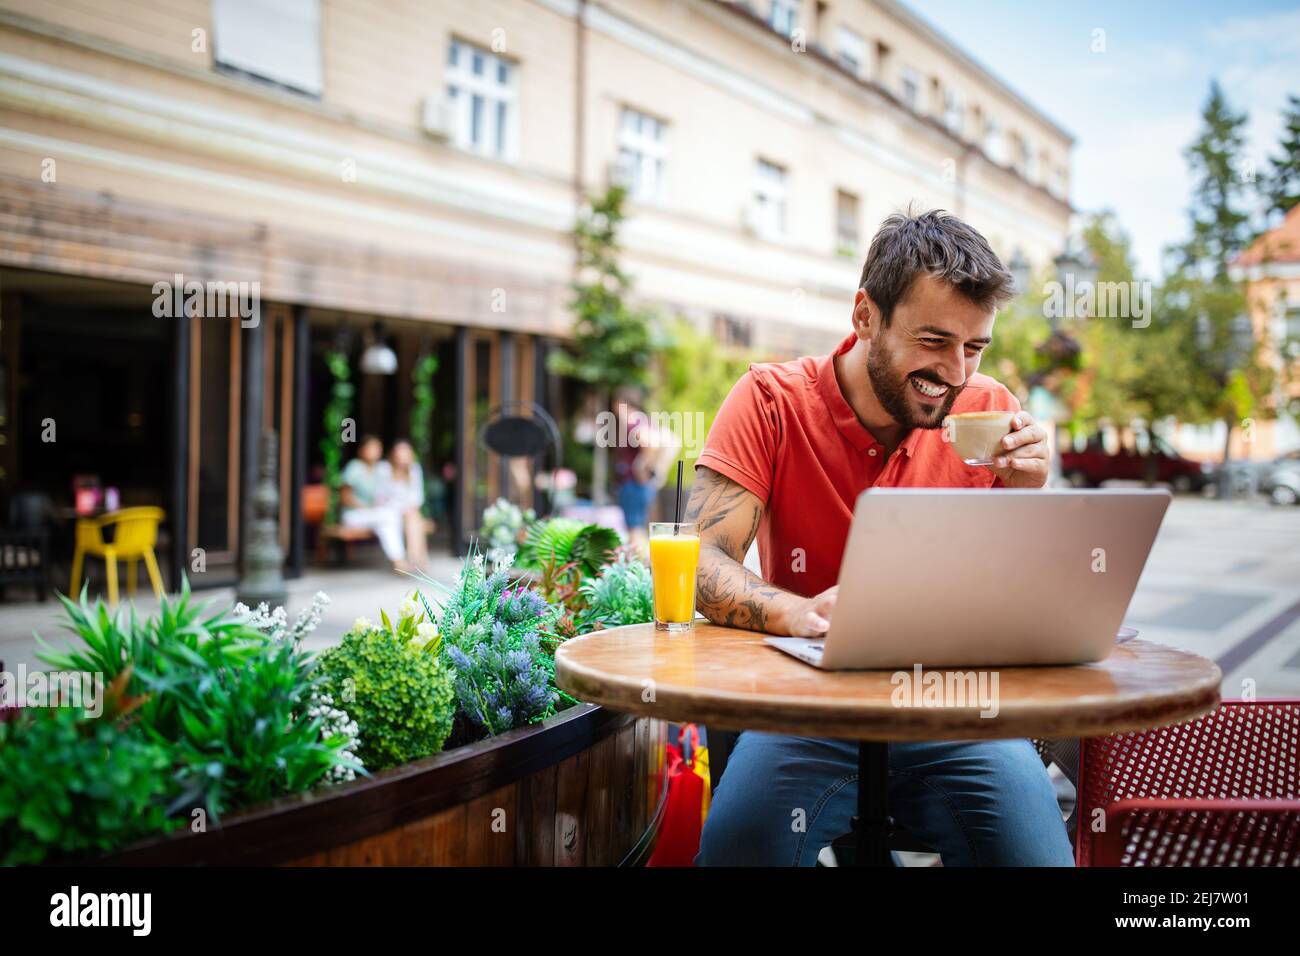 Young man having fun, enjoying free time on laptop and smiling while sitting in cafe Stock Photo